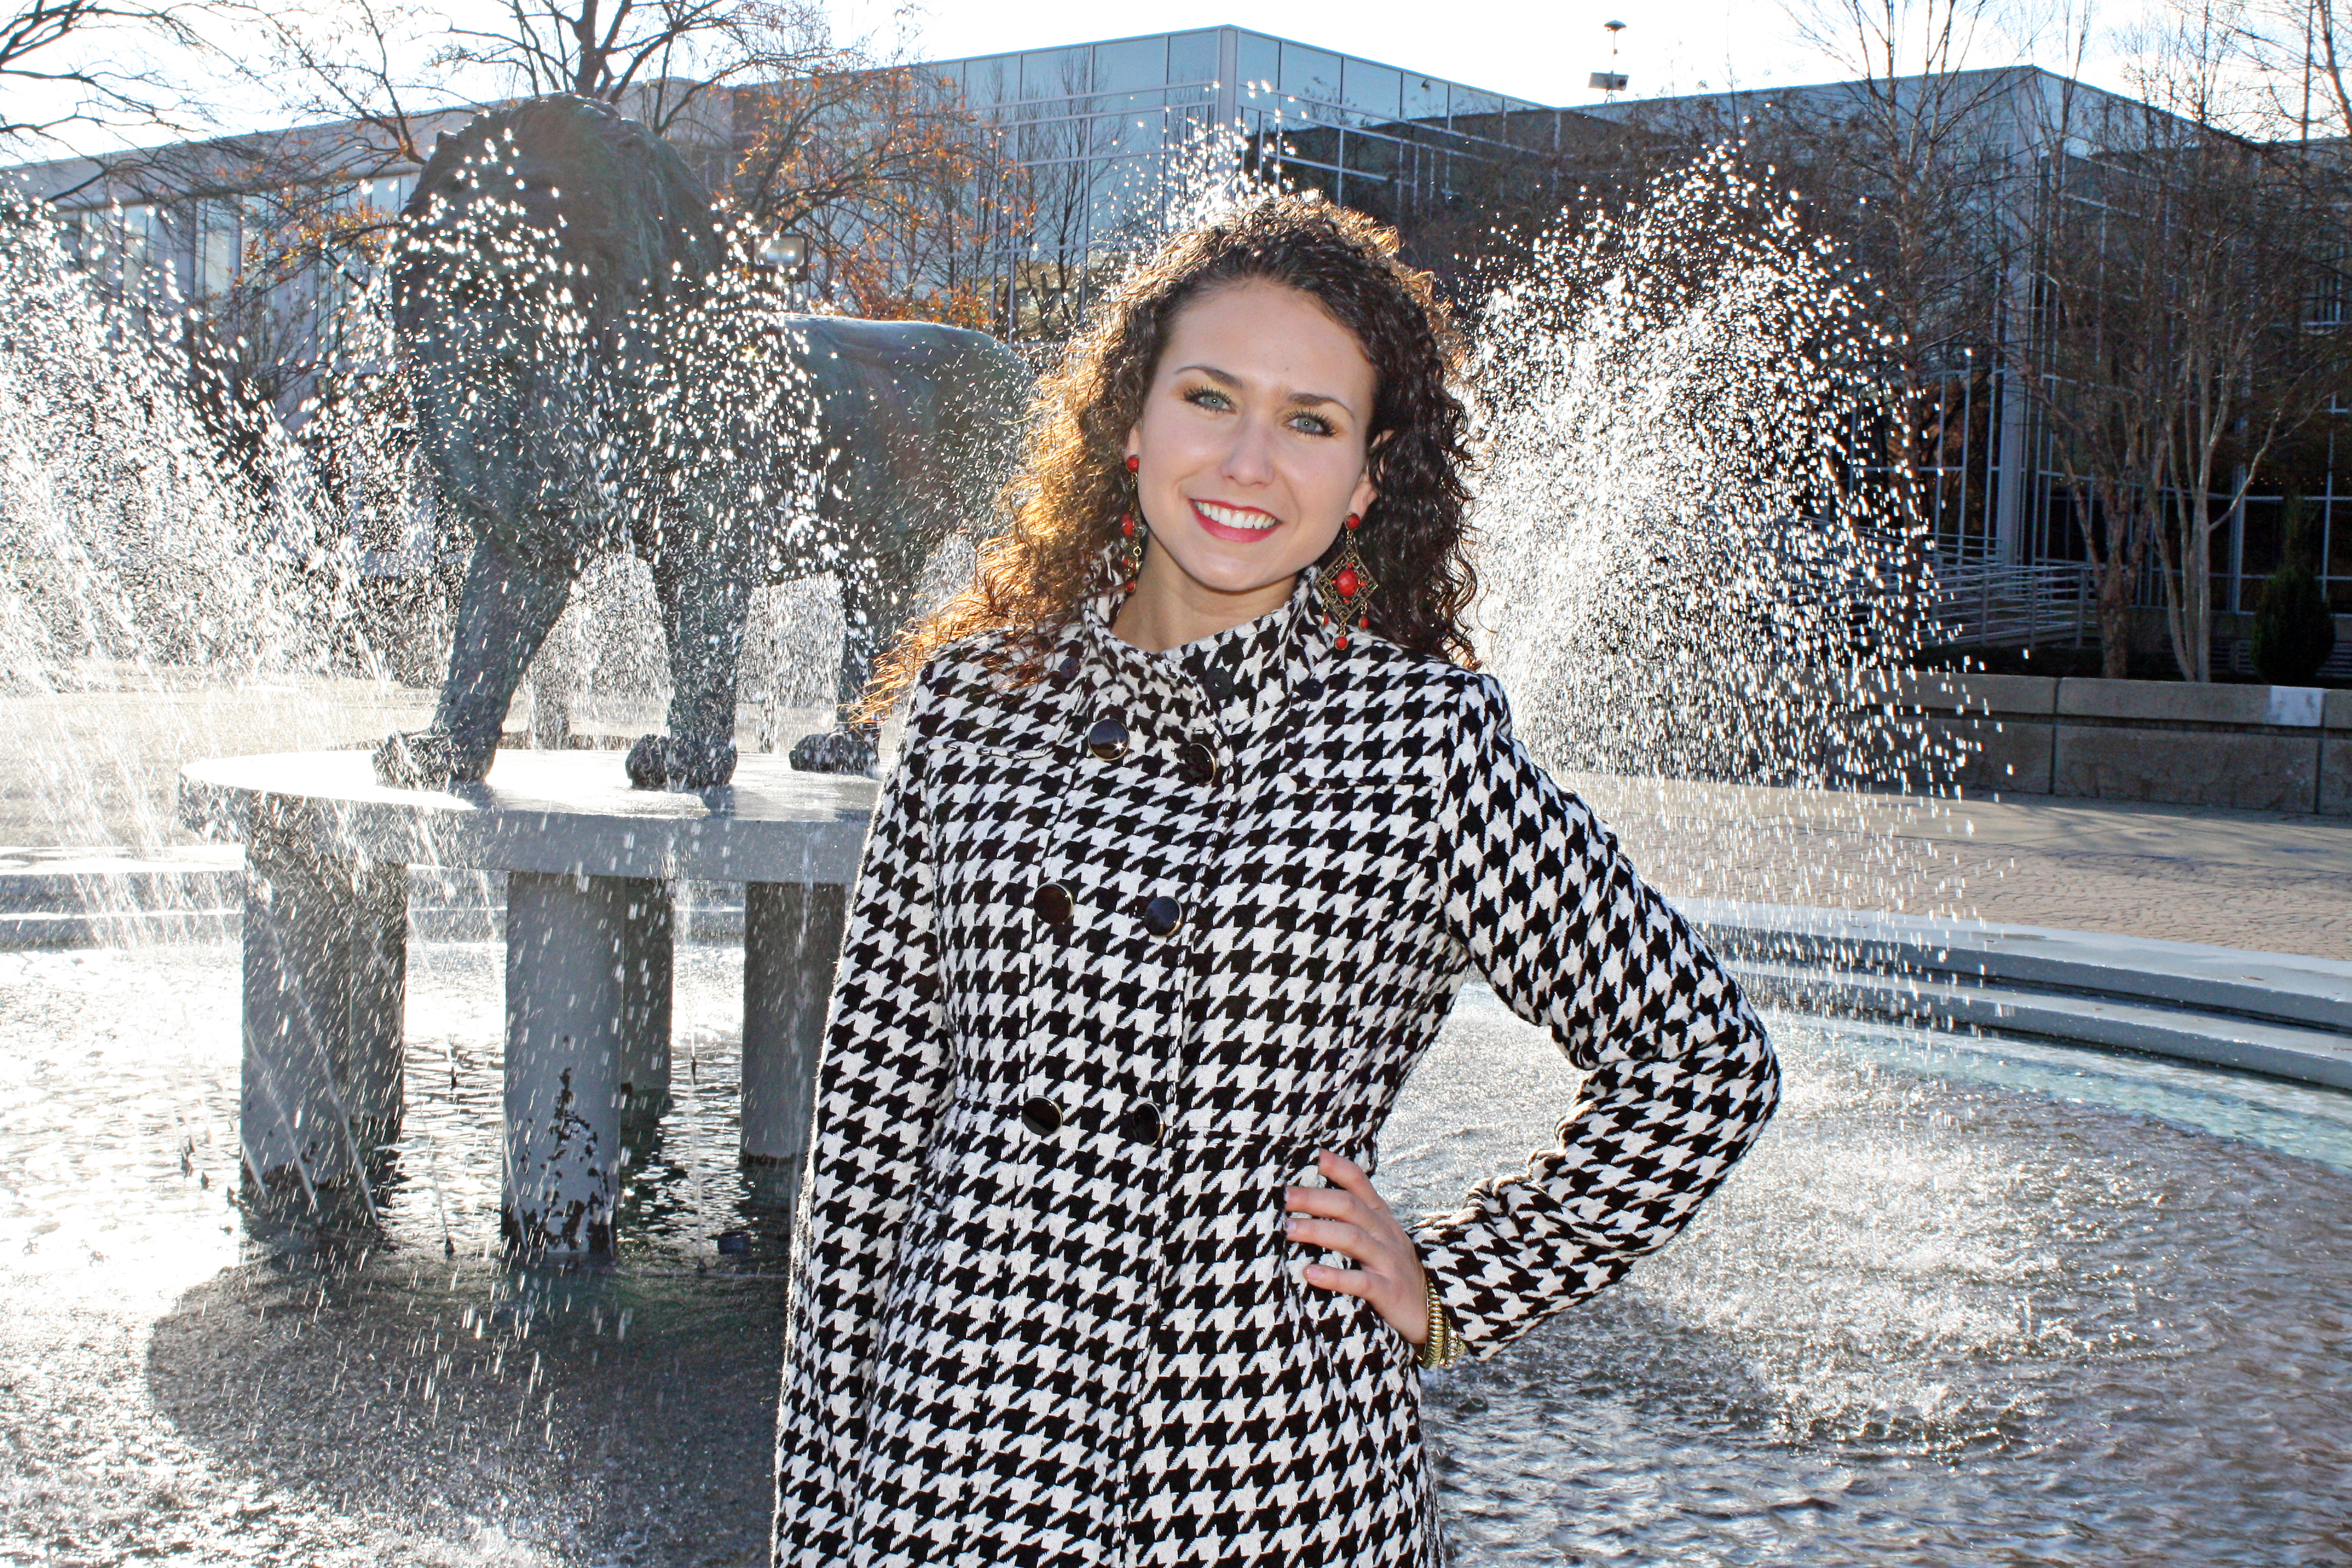 Amber Garofalo, the Outstanding Scholar for the College of Sciences